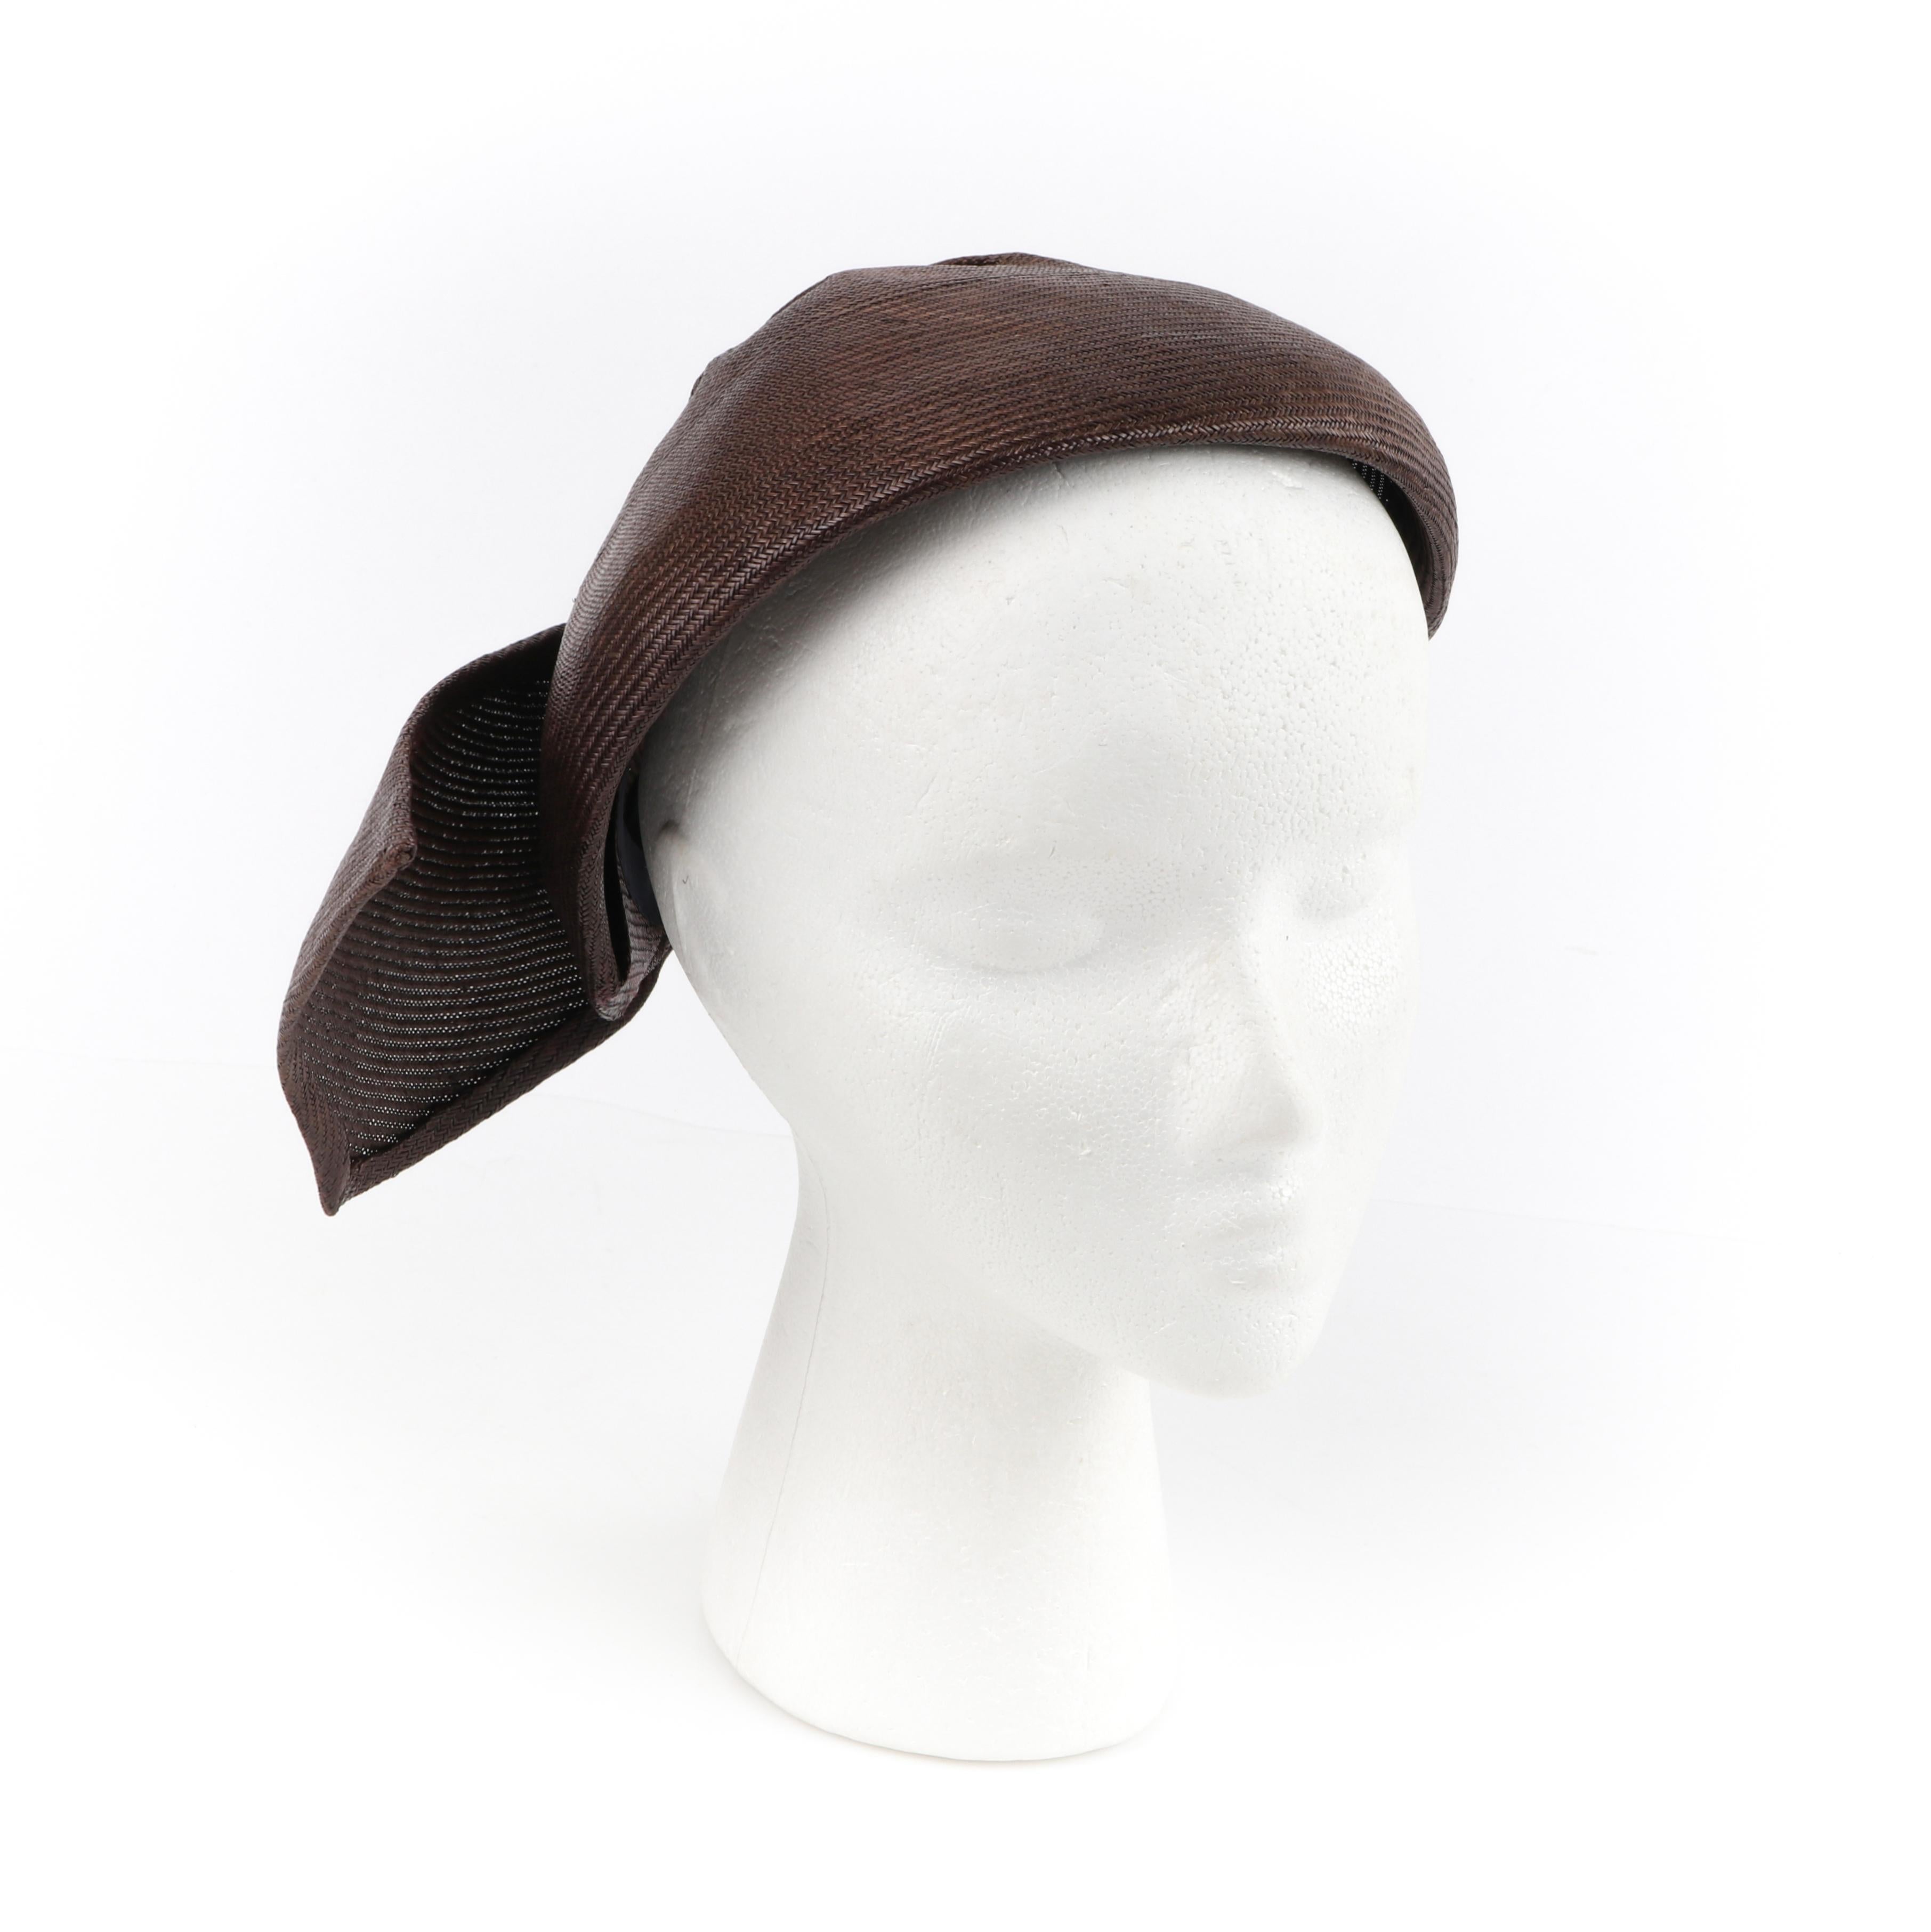 Women's CHRISTIAN DIOR c.1950s Brown Woven Straw Sweeping Knife Pleat Crown Cap Hat